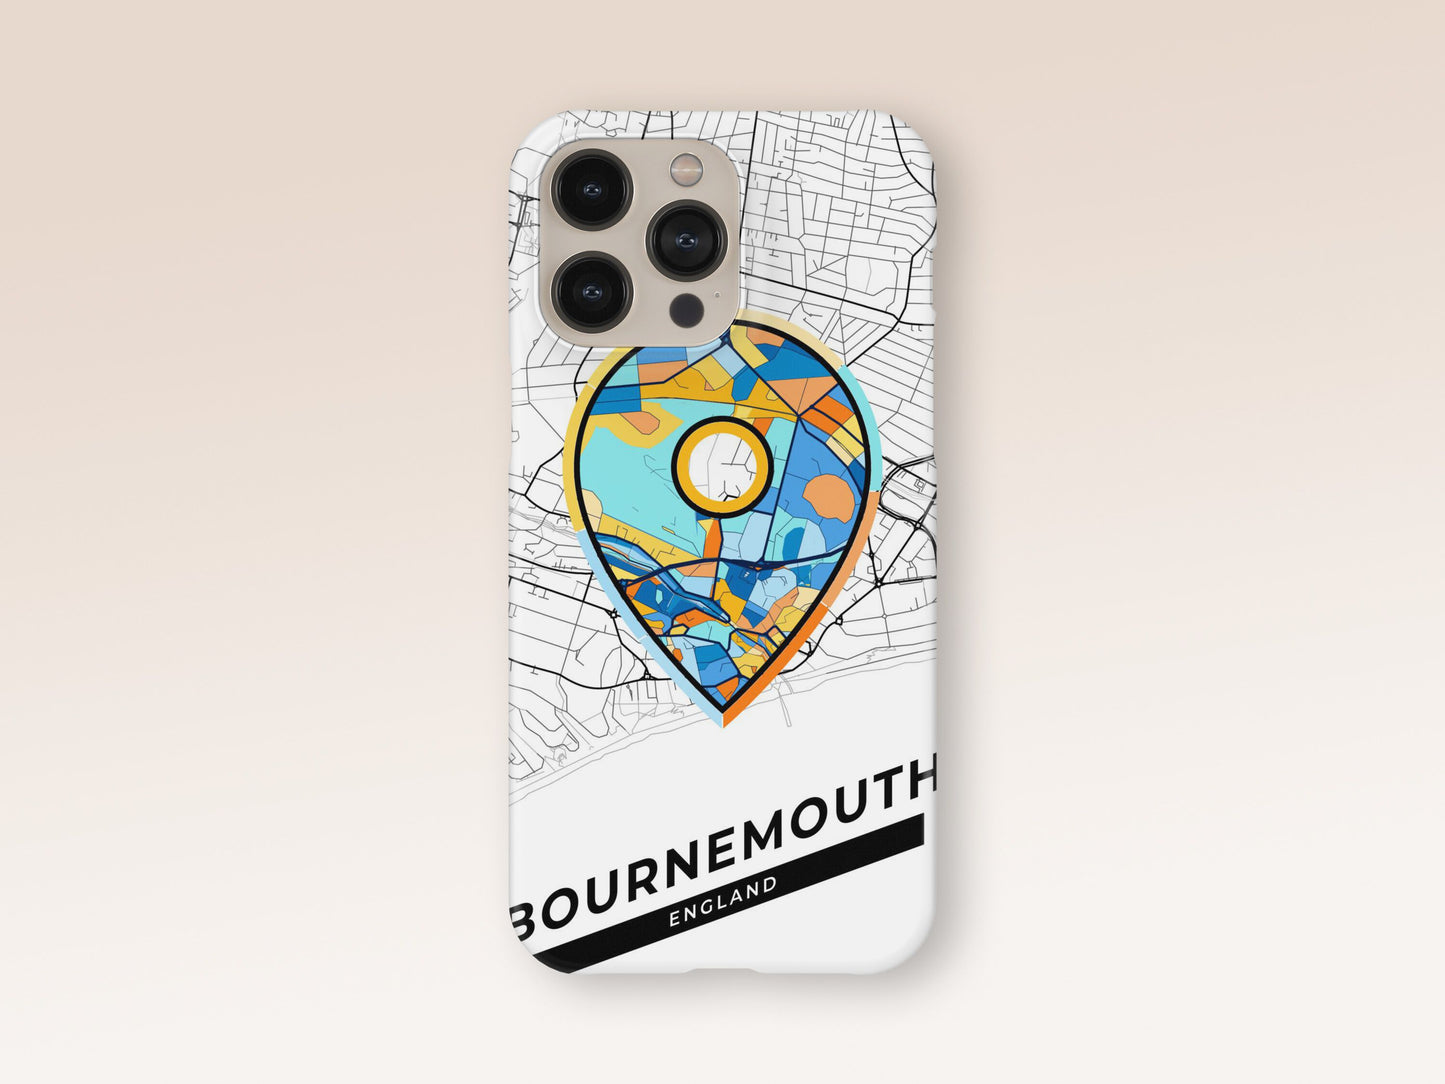 Bournemouth England slim phone case with colorful icon. Birthday, wedding or housewarming gift. Couple match cases. 1